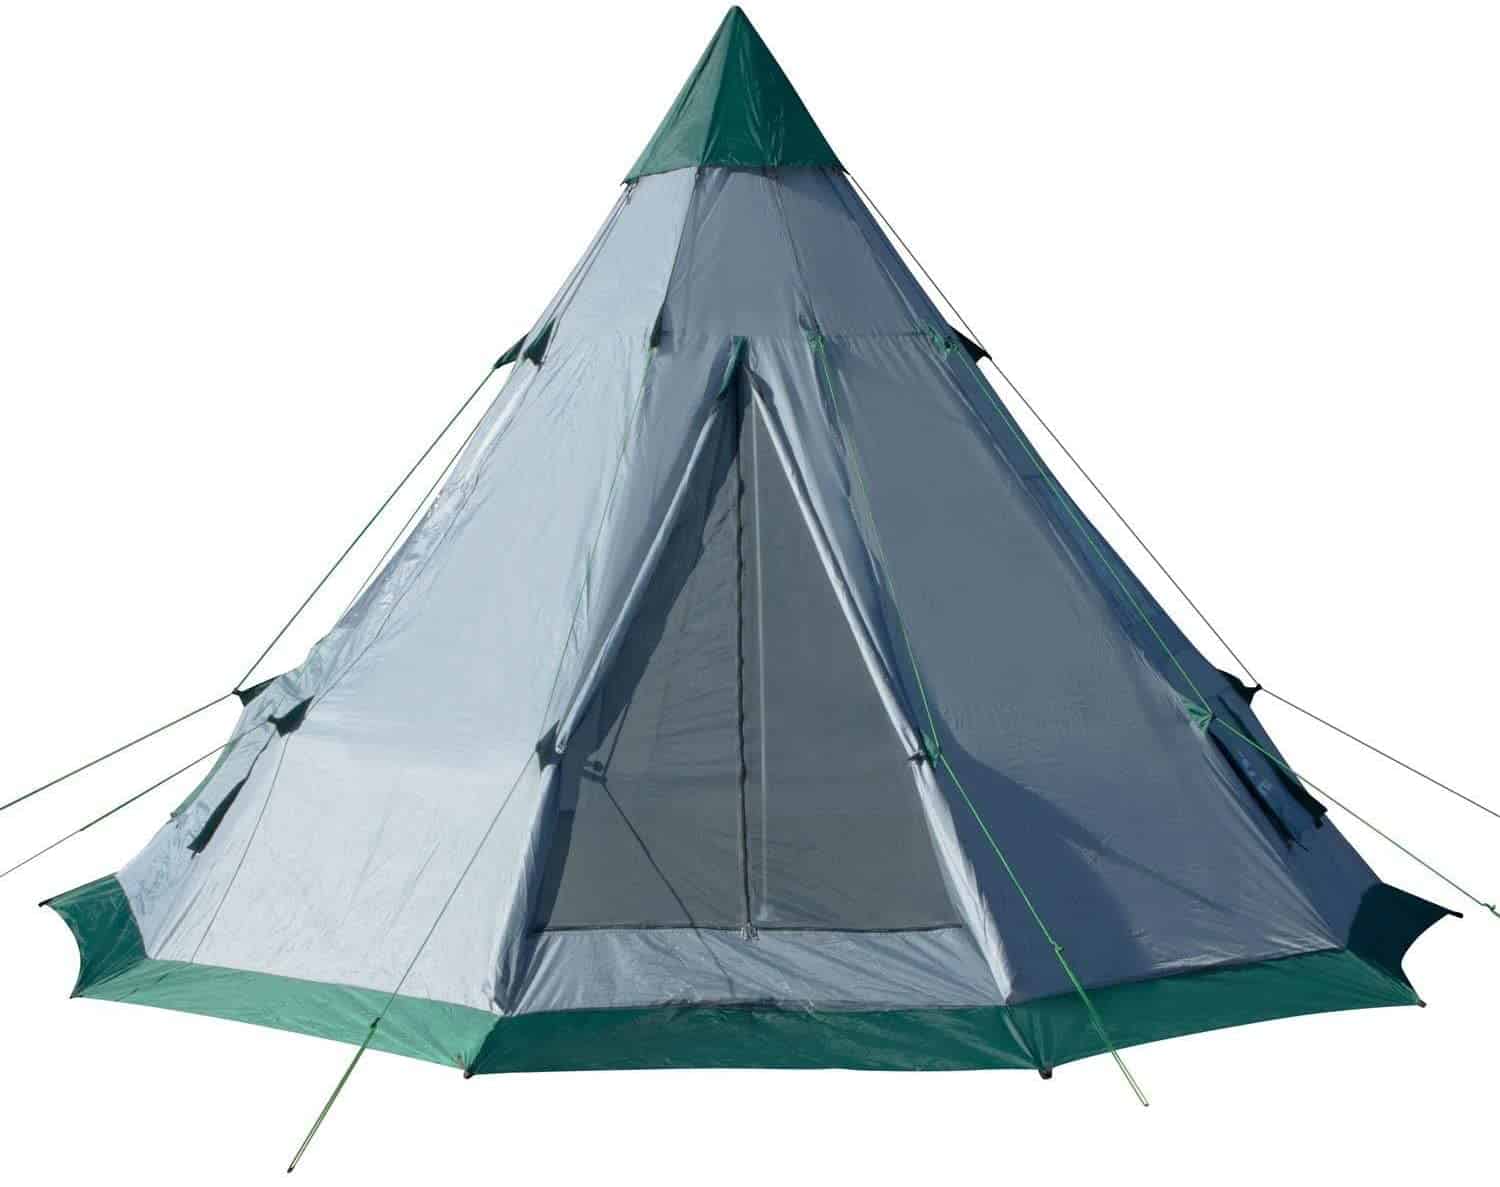 Winterial 6-7 Person Teepee Tent